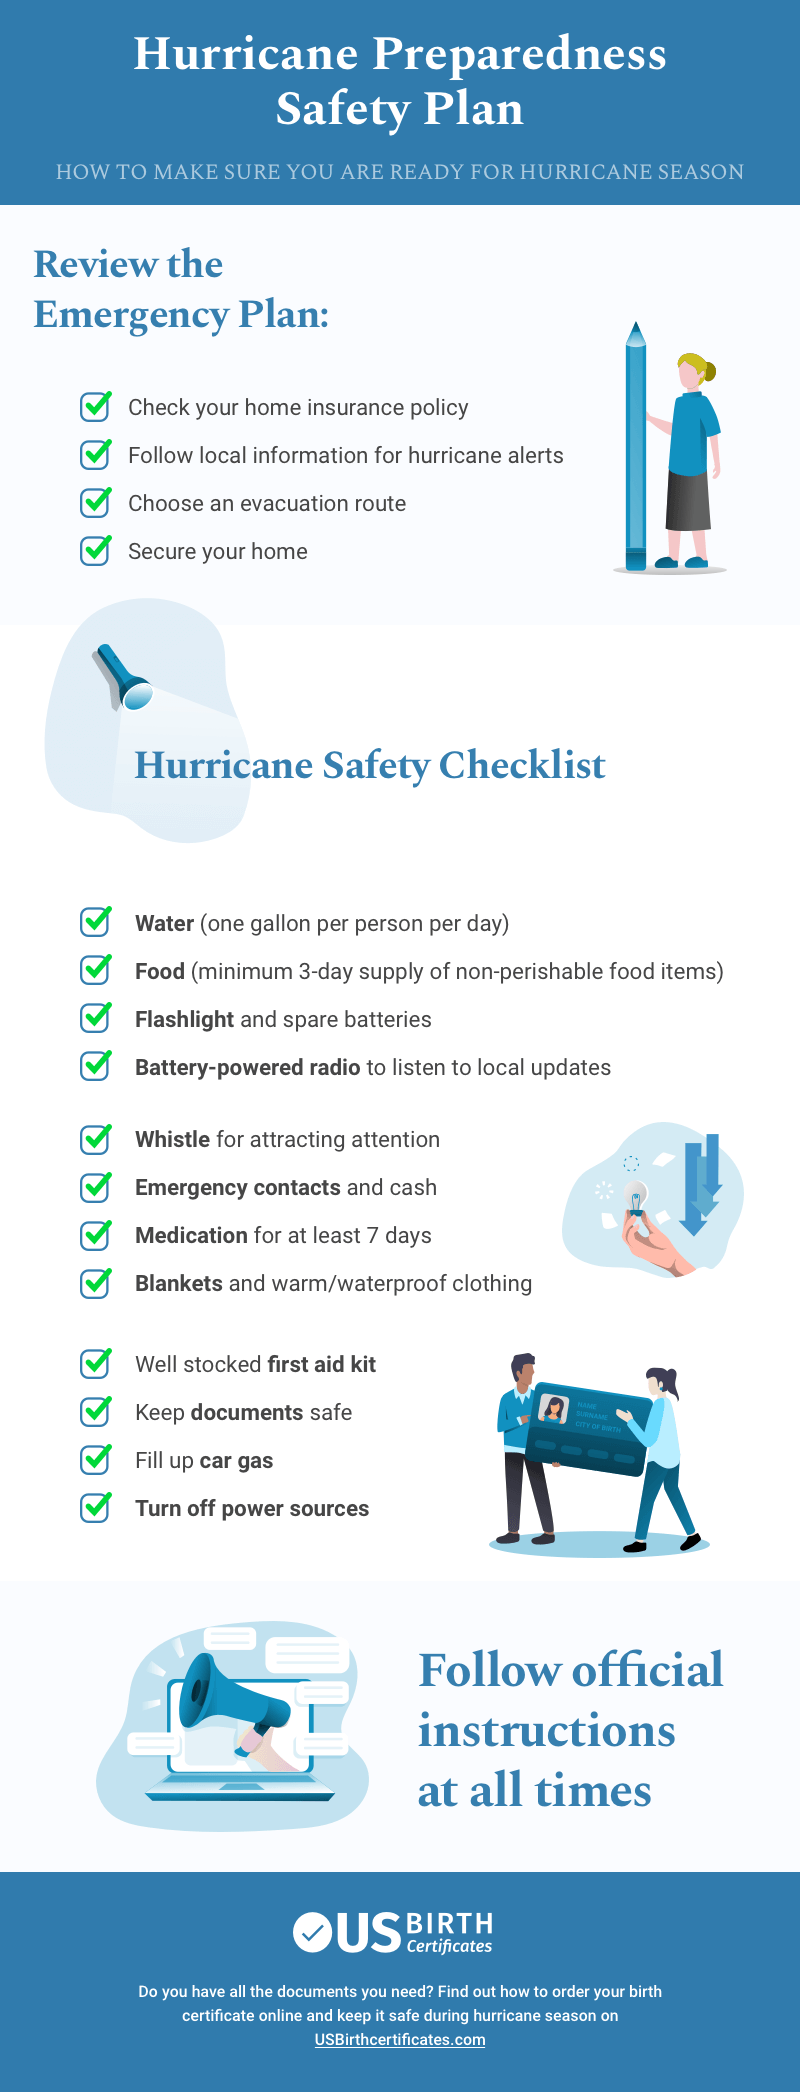 https://www.usbirthcertificates.com/user/pages/cms/08.articles/hurricane-season-how-to-be-prepared/hurricane-season-safetly-plan.png